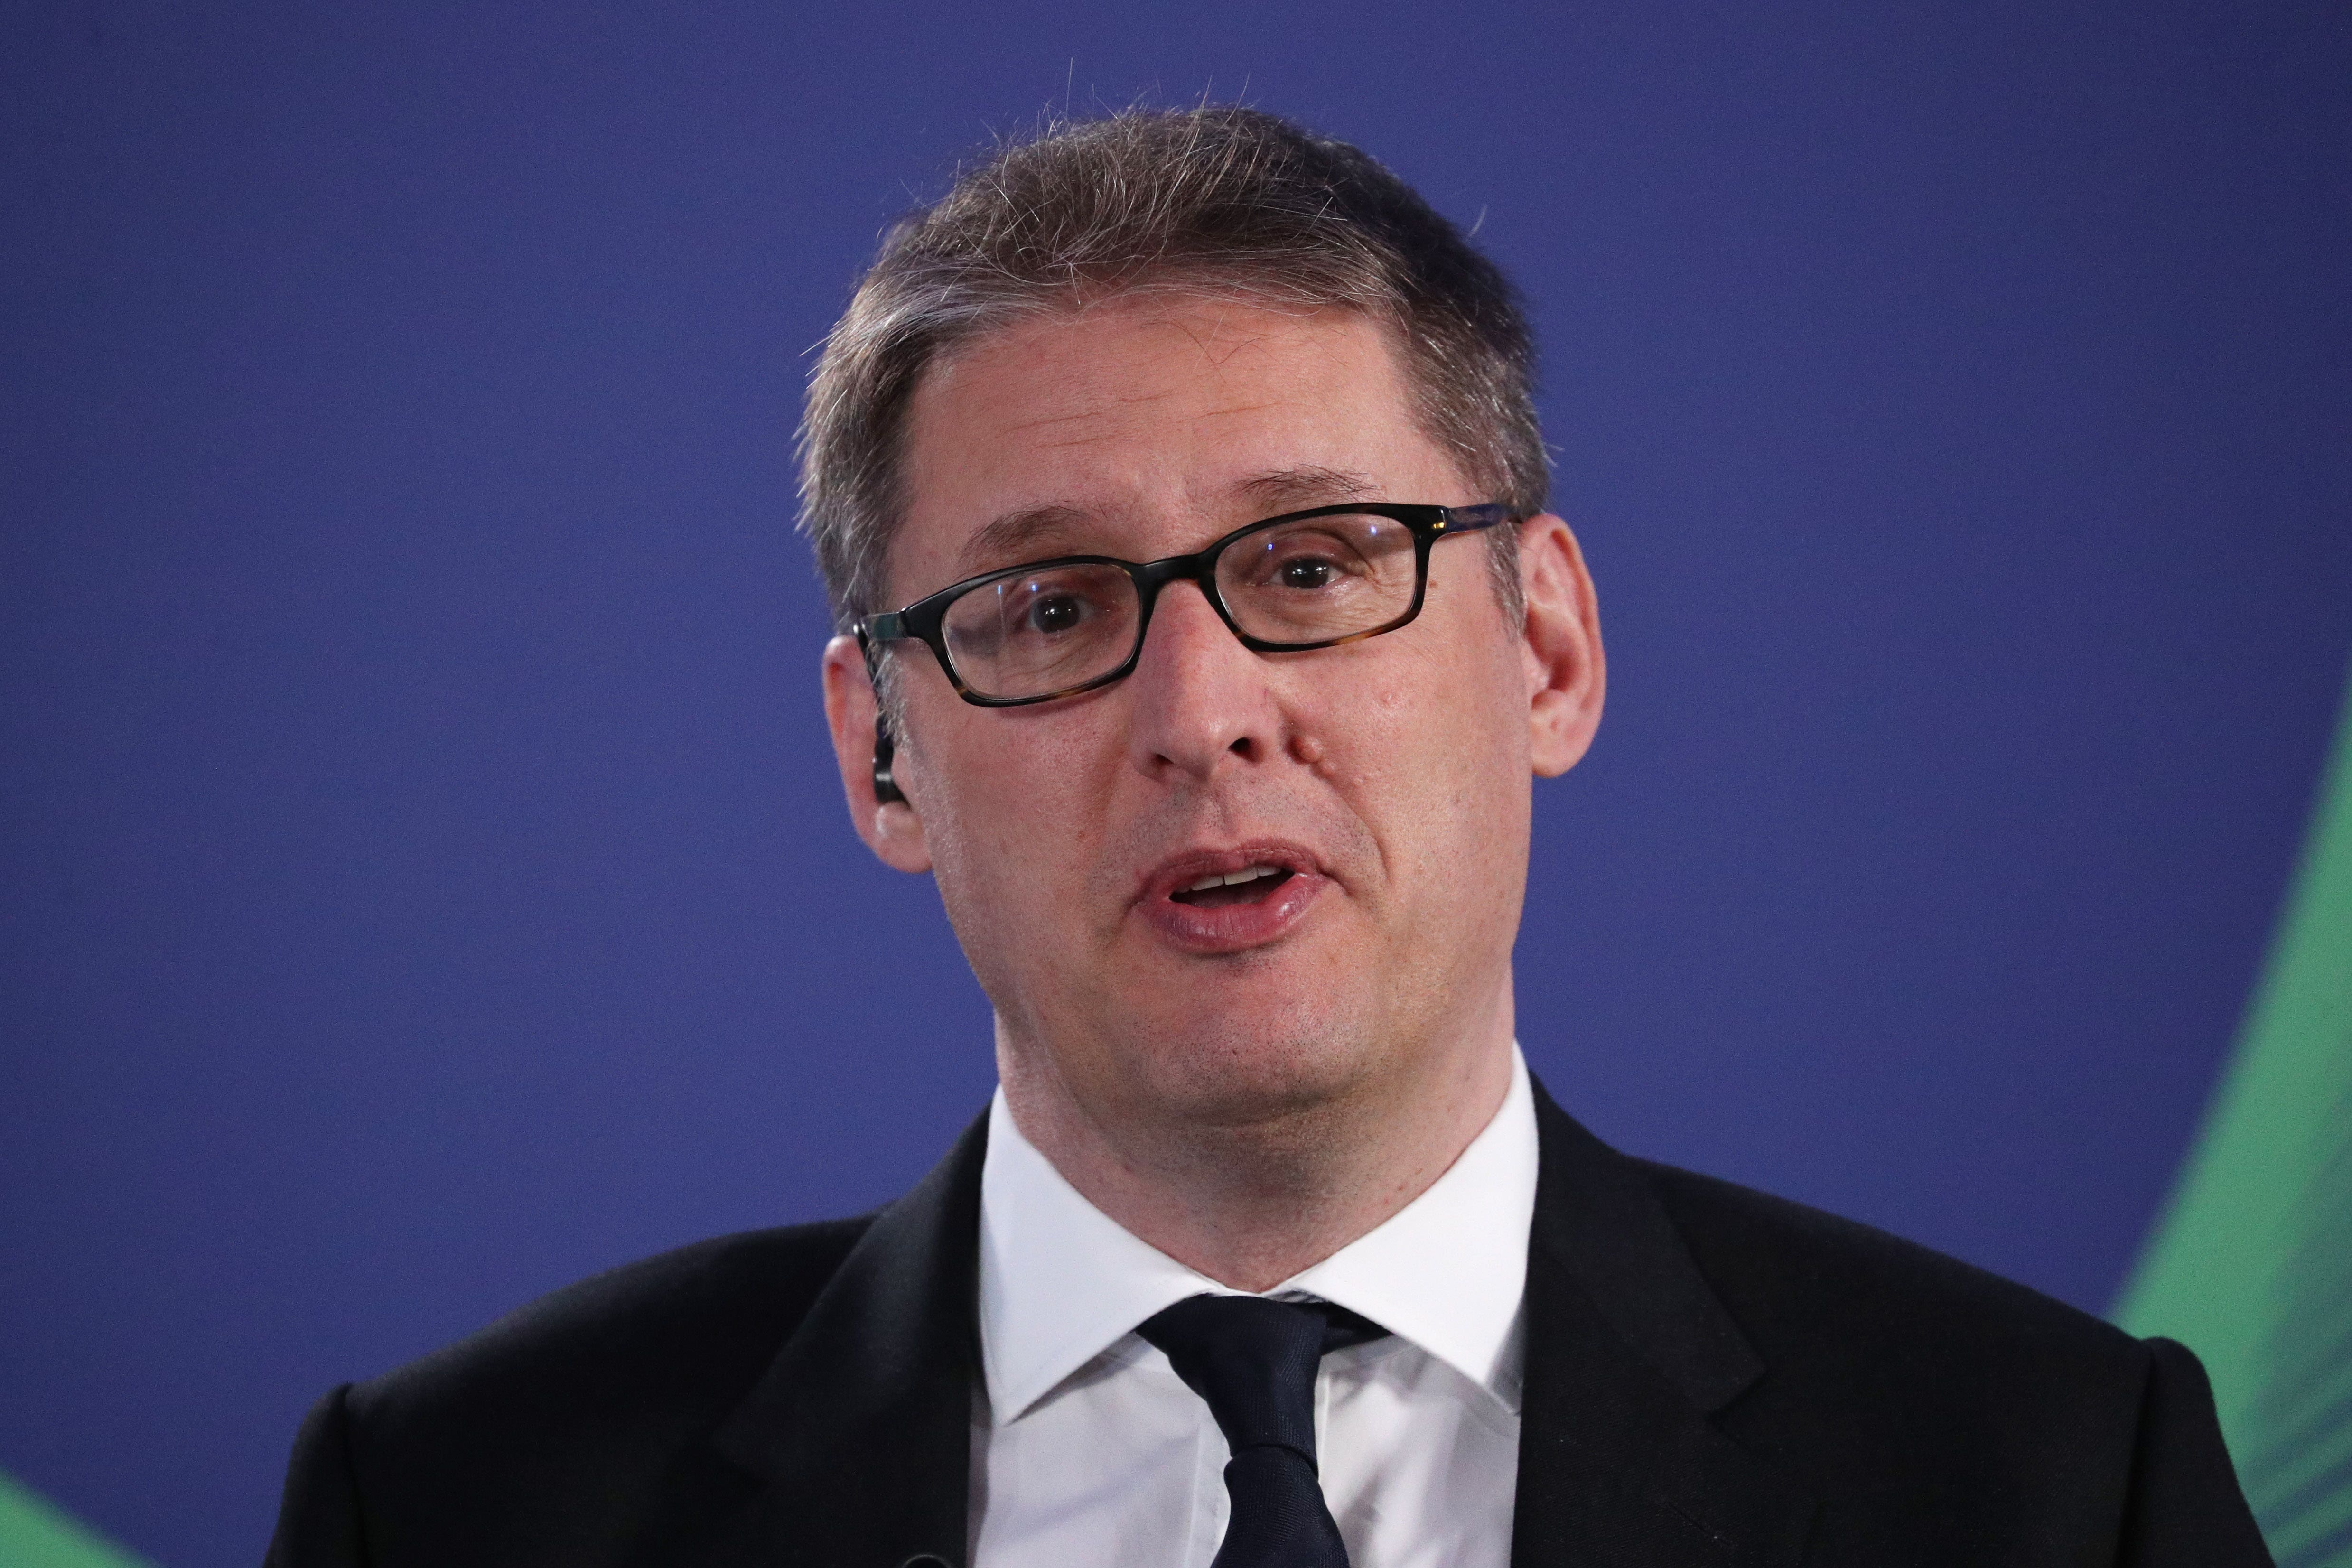 Tony Danker has stepped aside as CBI director-general pending an investigation following complaints about his conduct in the workplace (Jonathan Brady/PA)